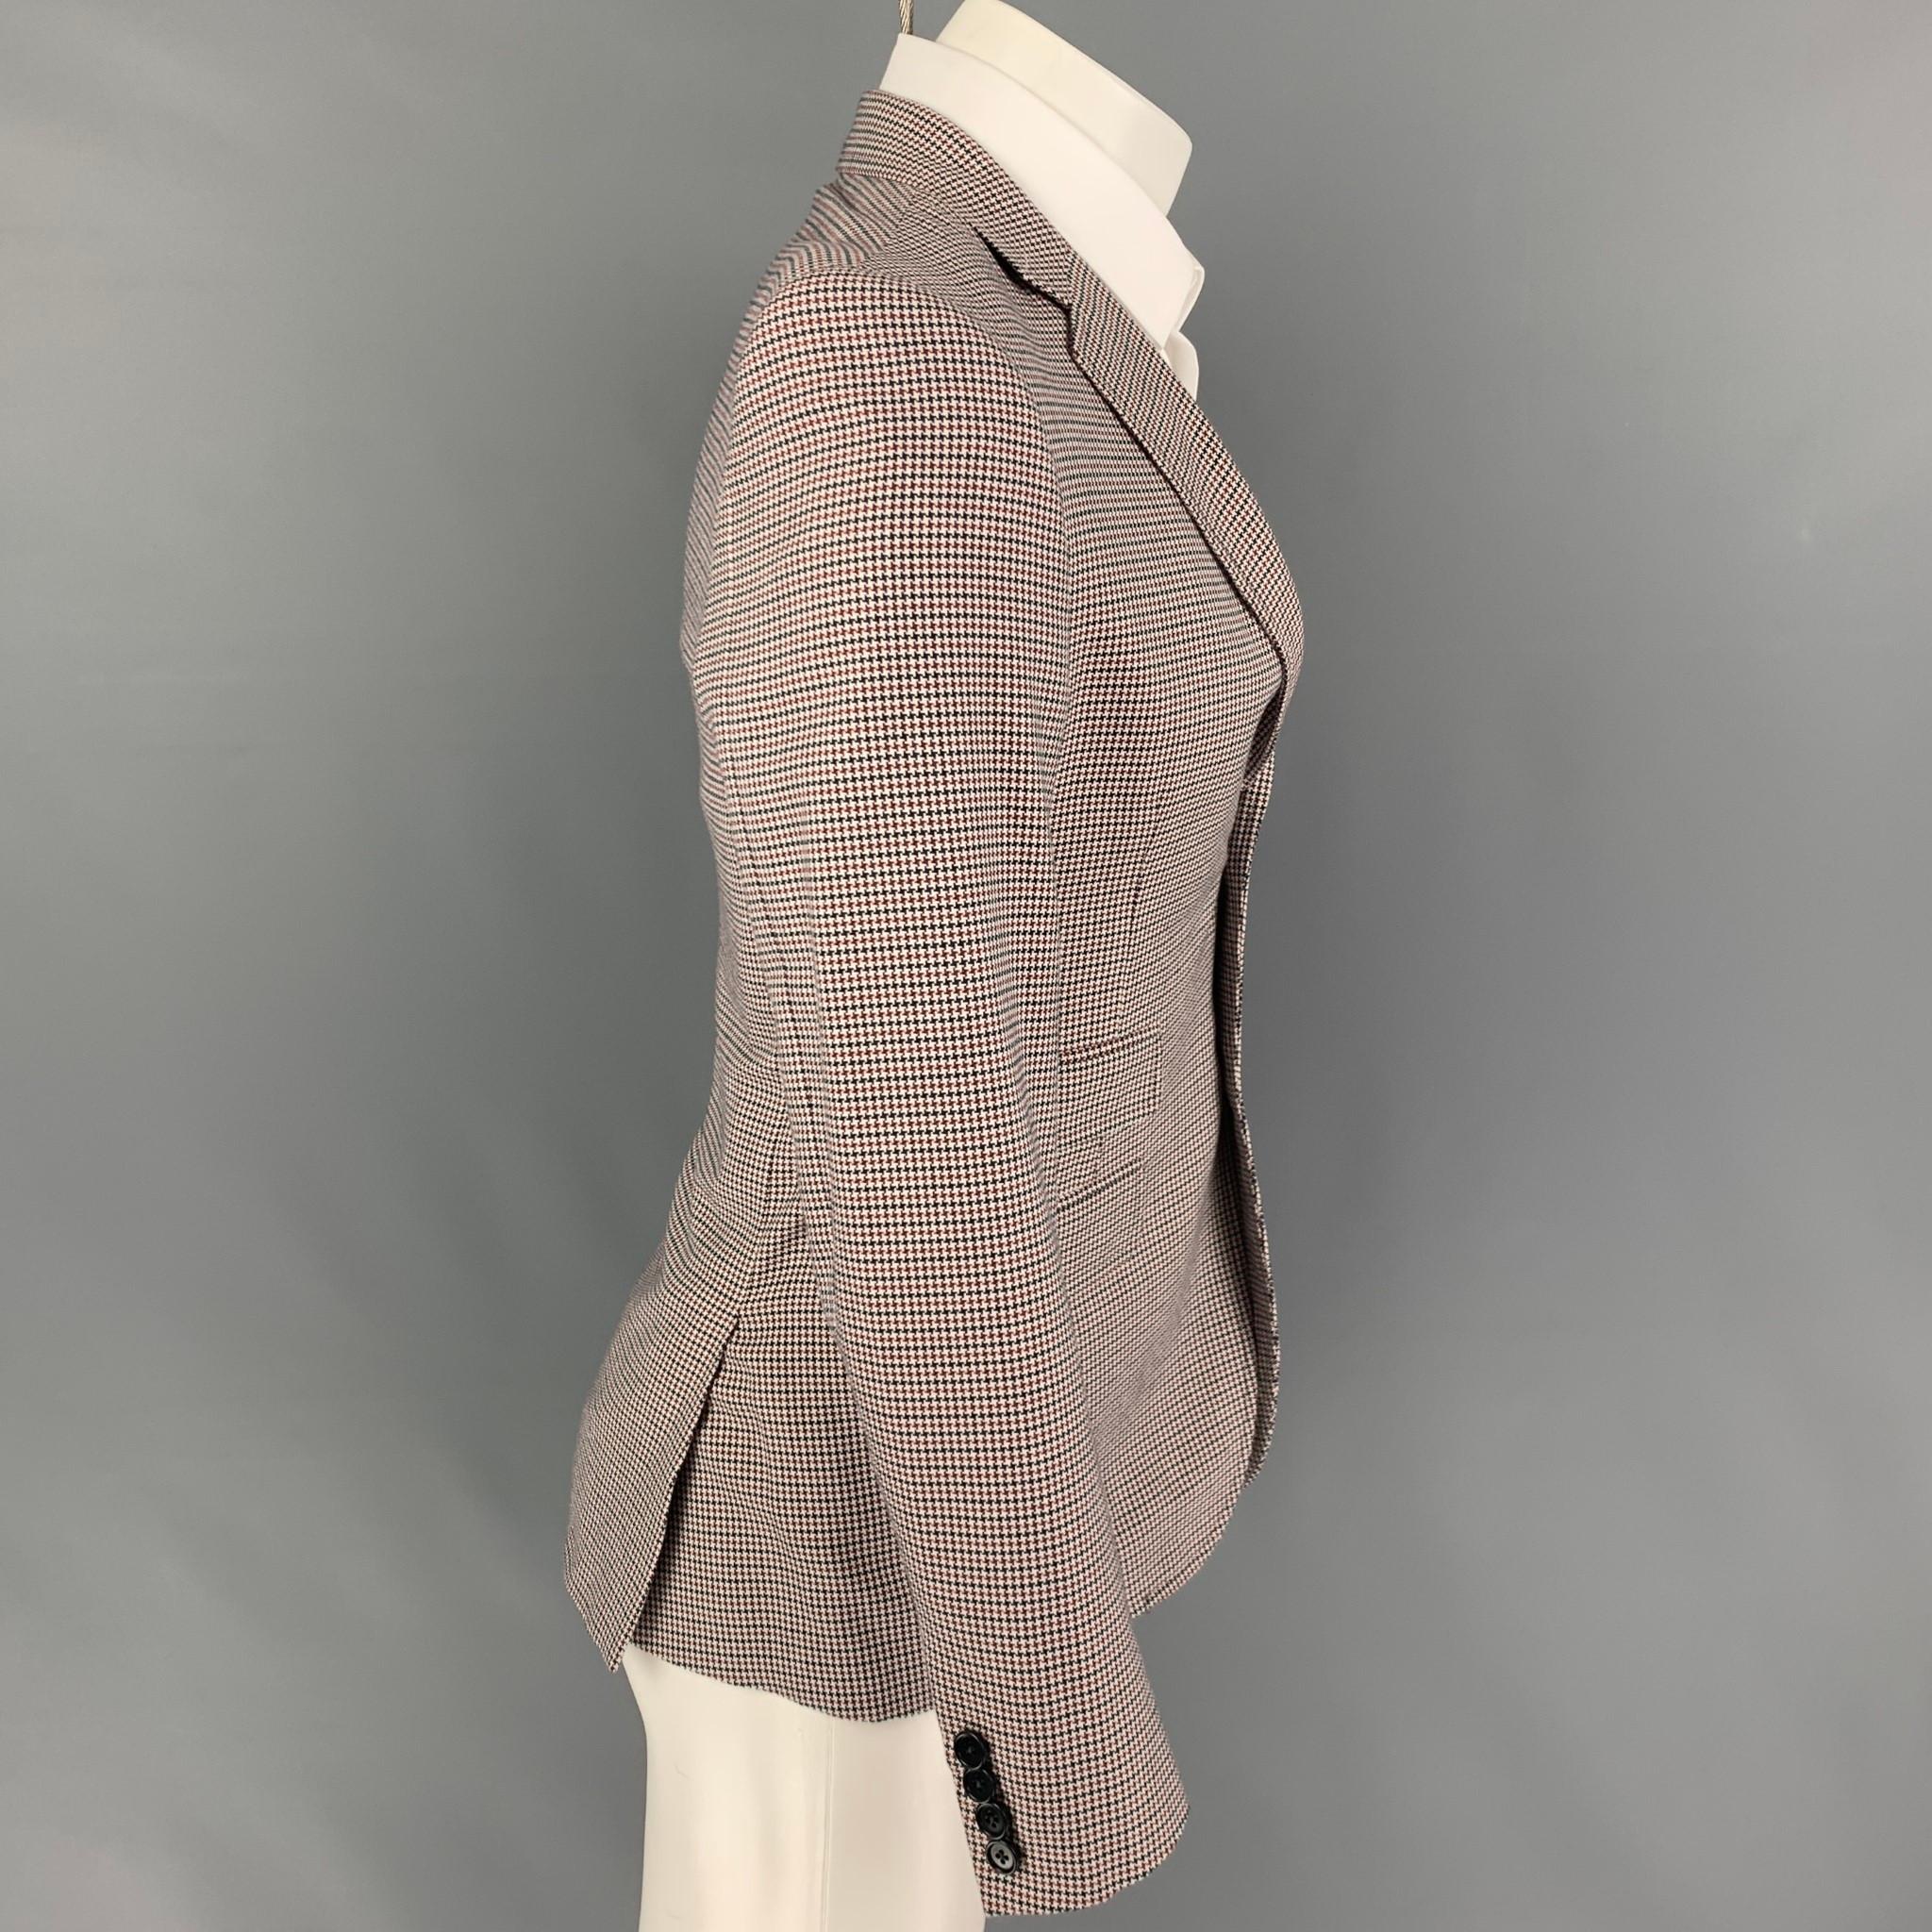 BAND OF OUTSIDERS sport coat comes in a white & navy houndstooth wool with a full liner featuring a notch lapel, flap pockets, double back vent, and a double button closure. Made in USA.

Very Good Pre-Owned Condition.
Marked: